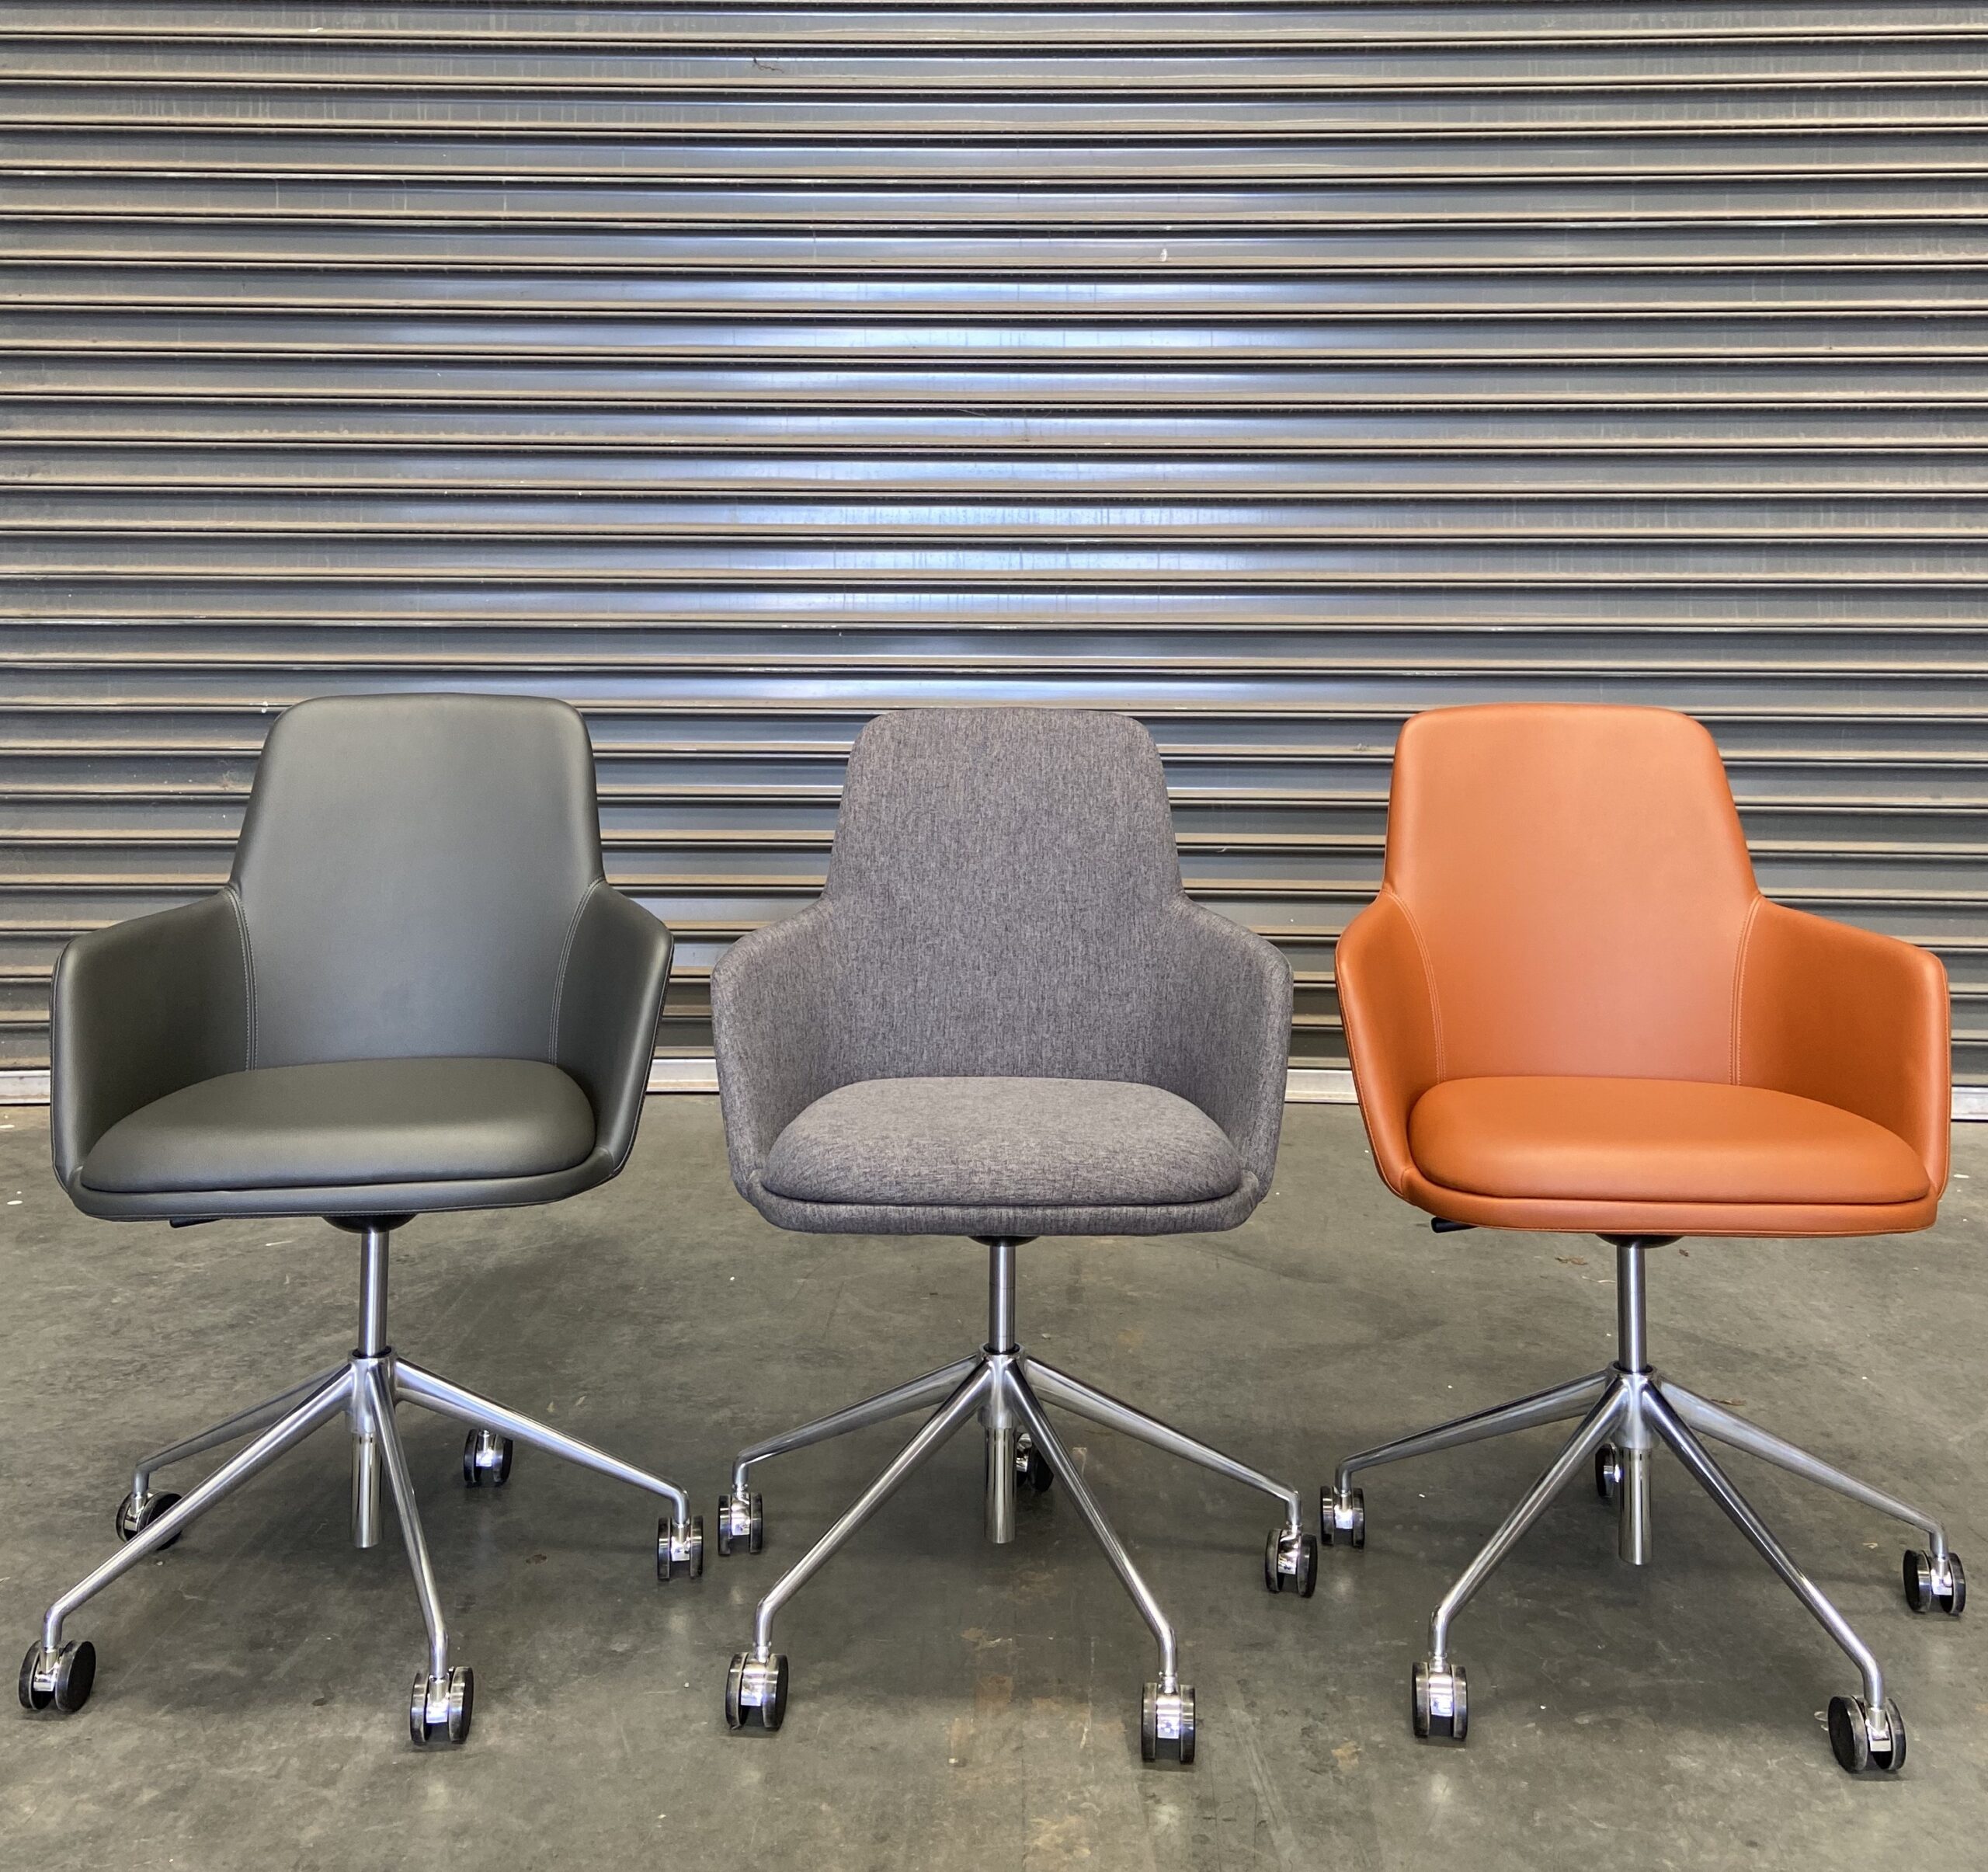 Newly Released Workplace Chairs | Corporate Chair Systems